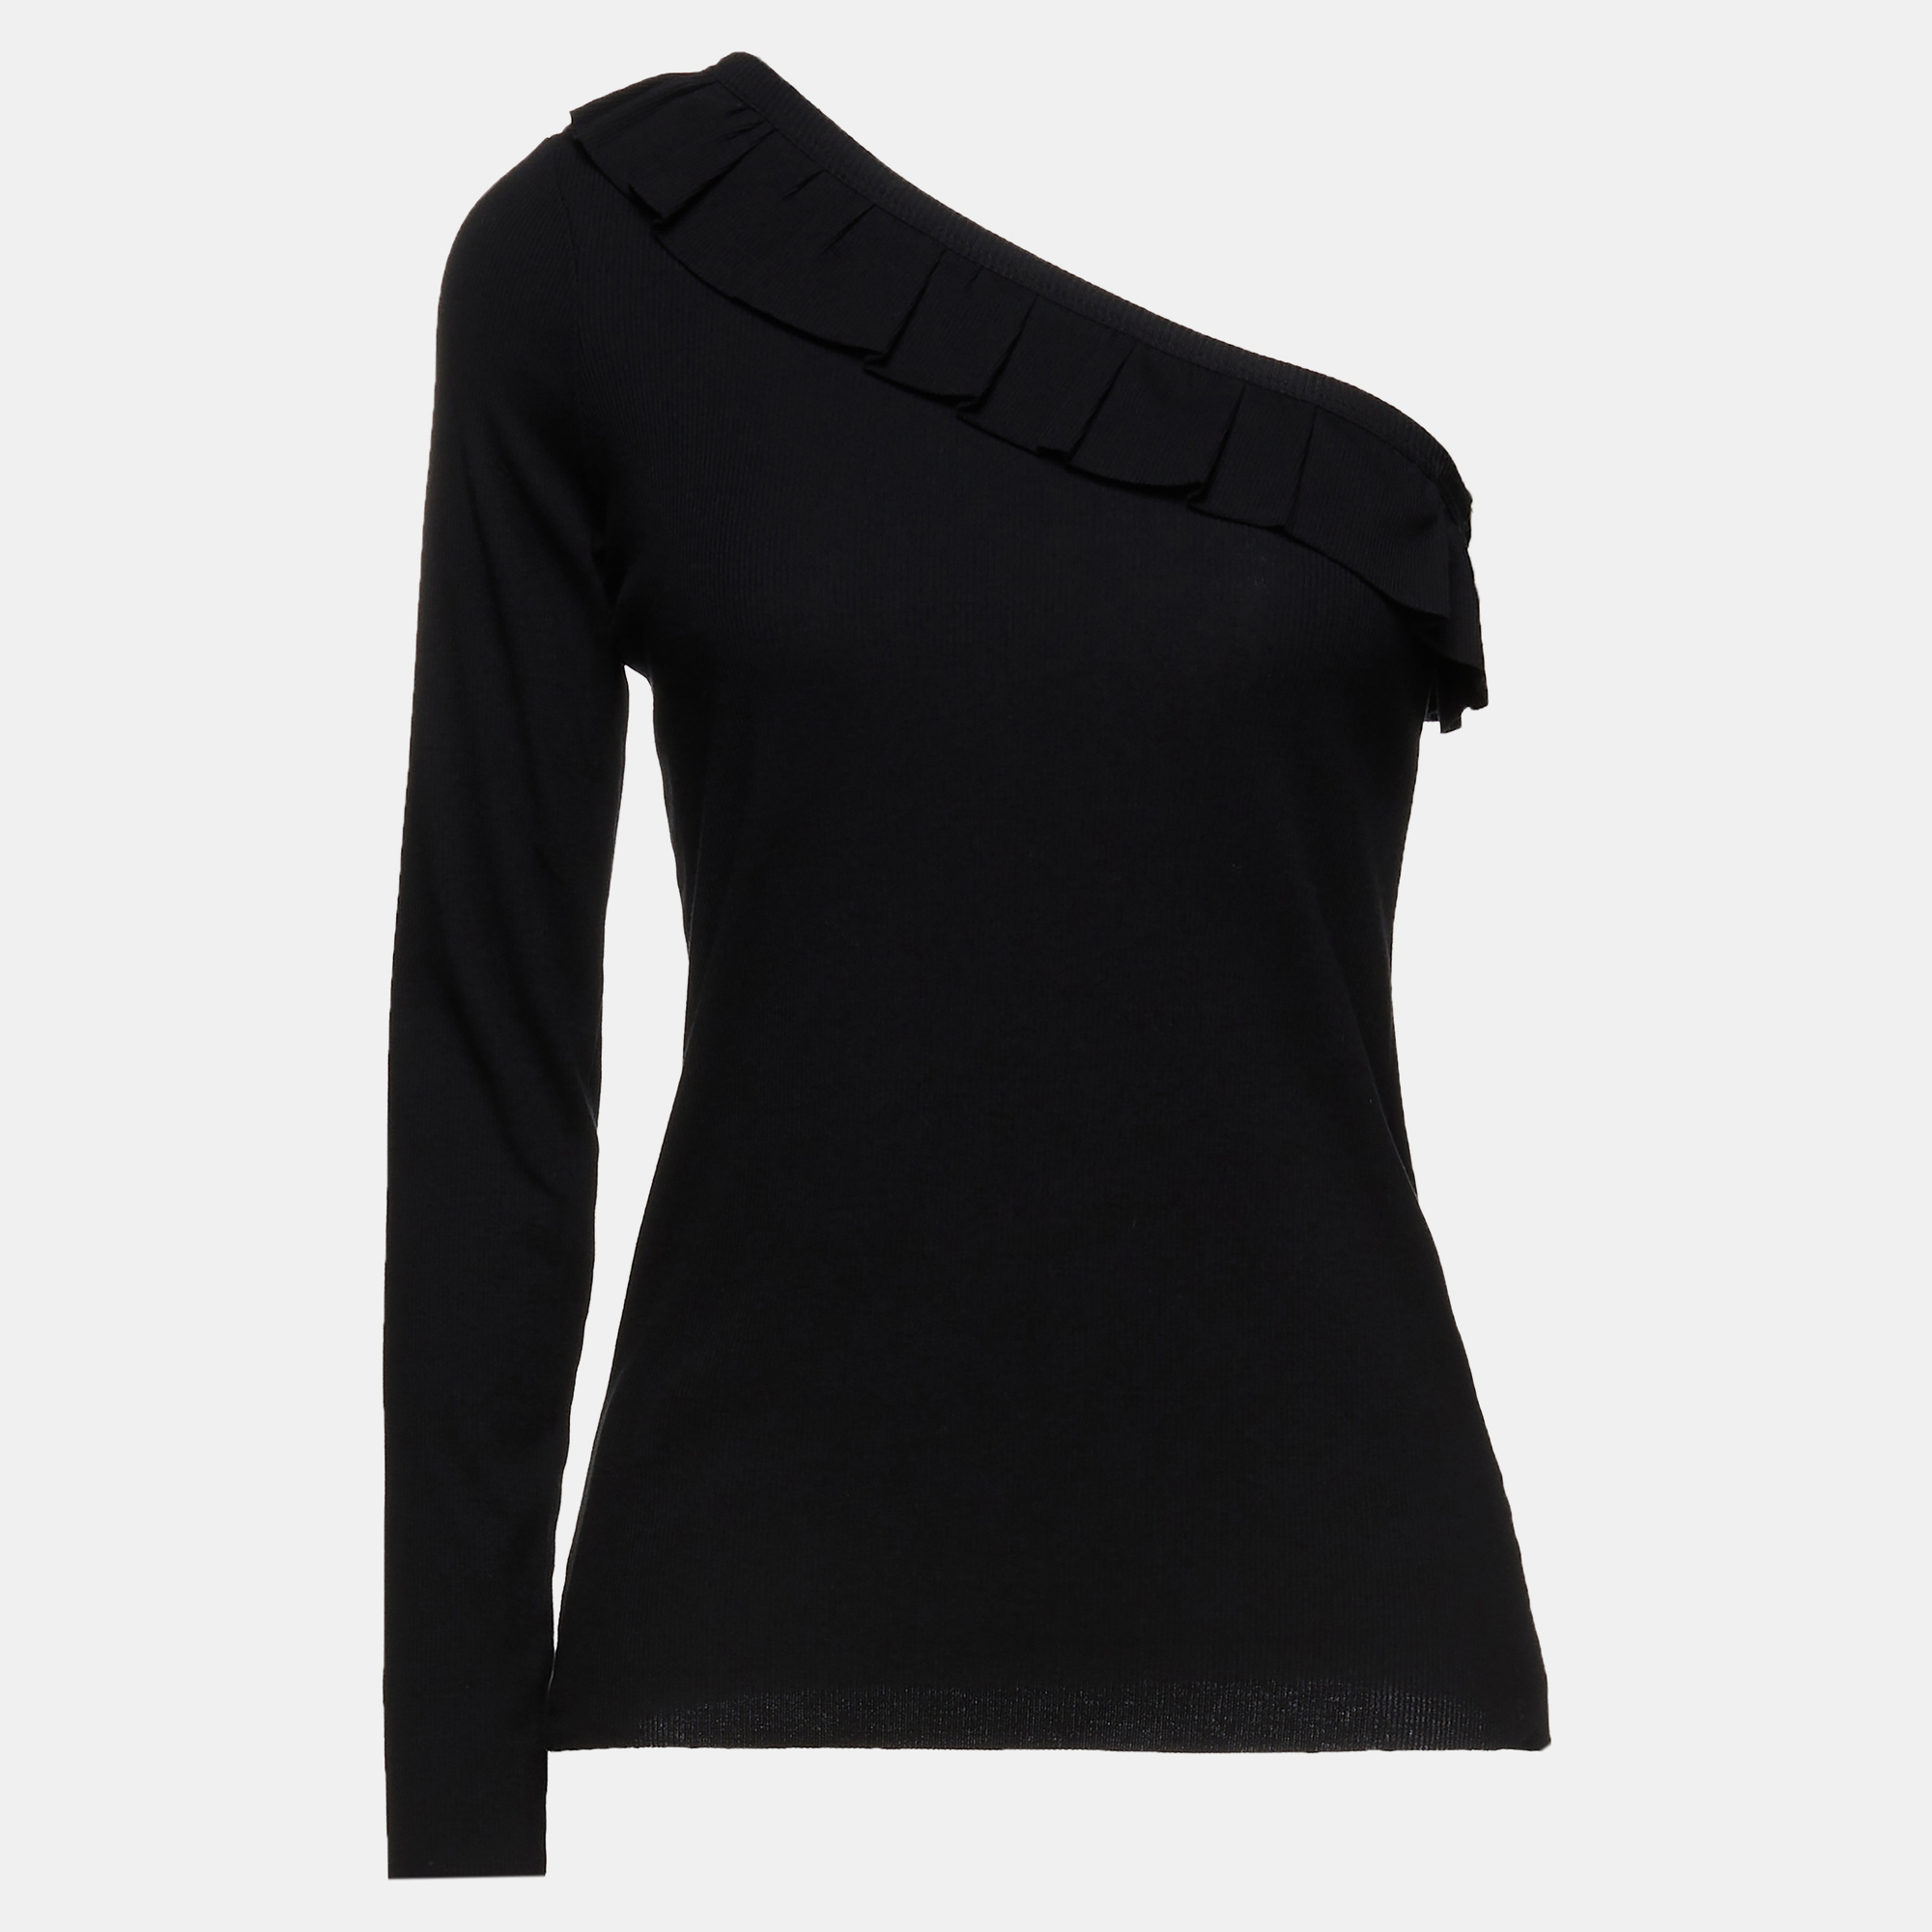 Let the latest addition to your closet be this designer top. Meticulously tailored and effortlessly chic its a versatile wardrobe staple youll love counting on.